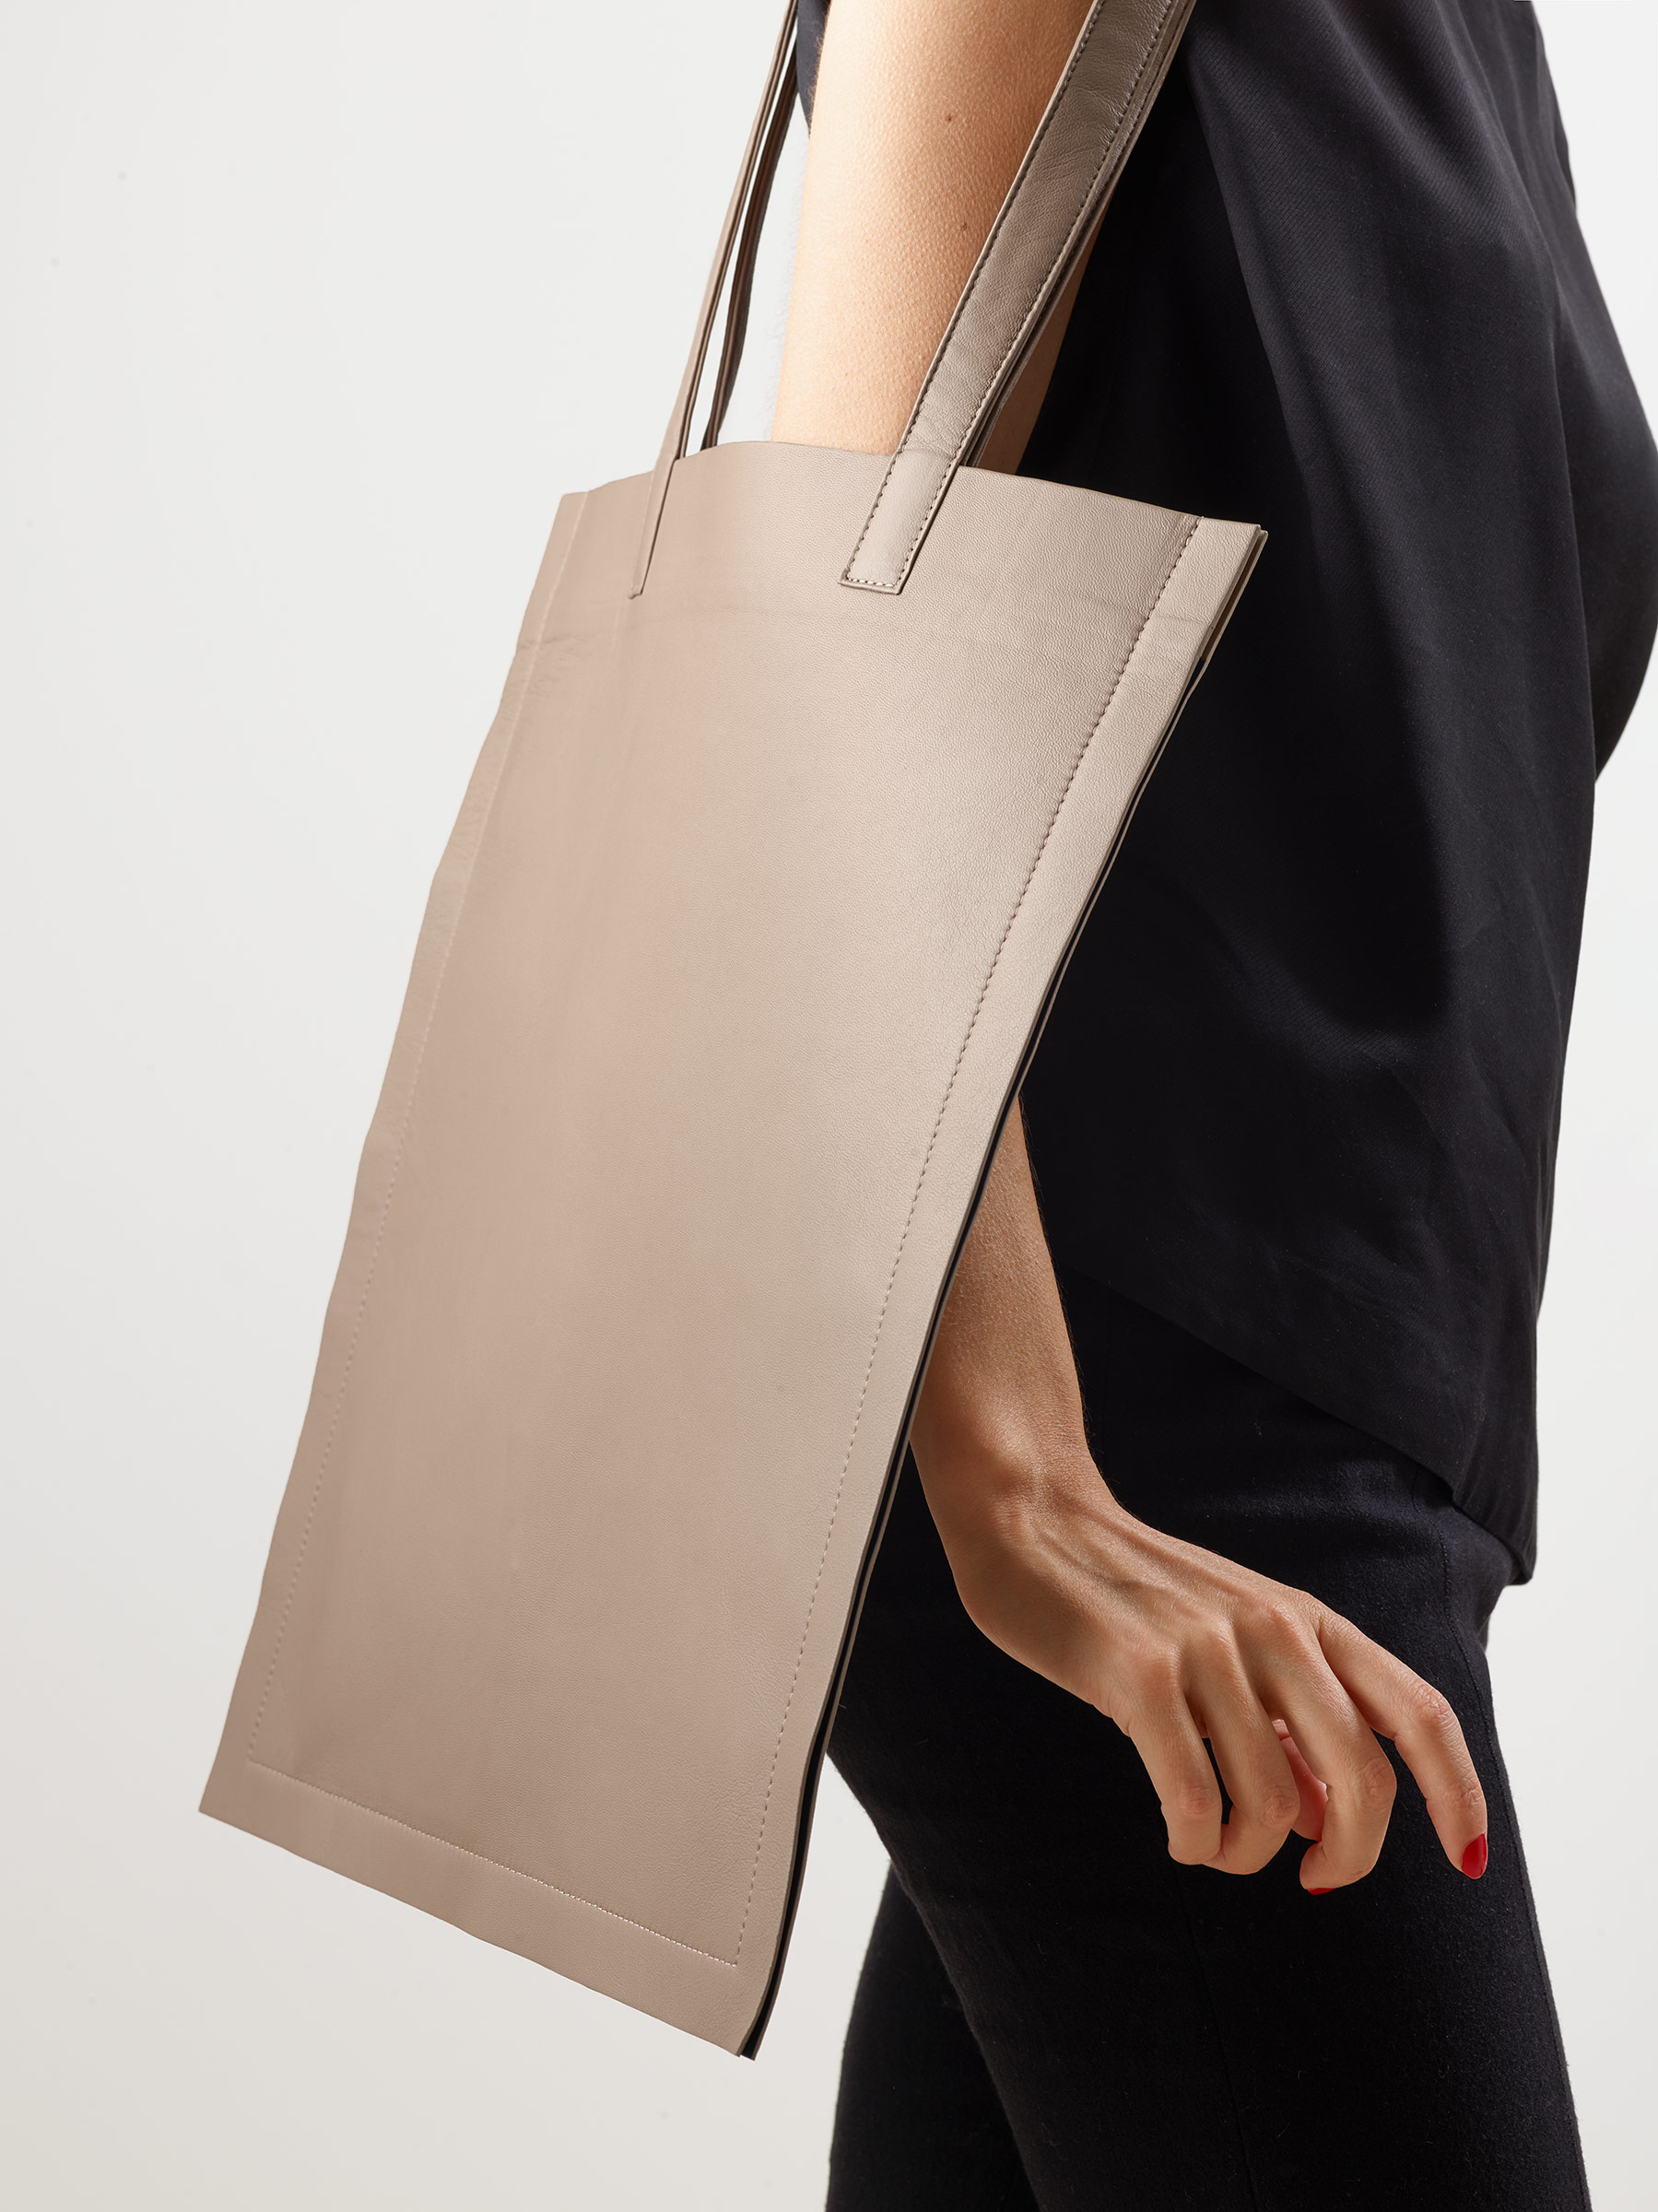 STRATO shoulder bag in taupe lamb nappa leather